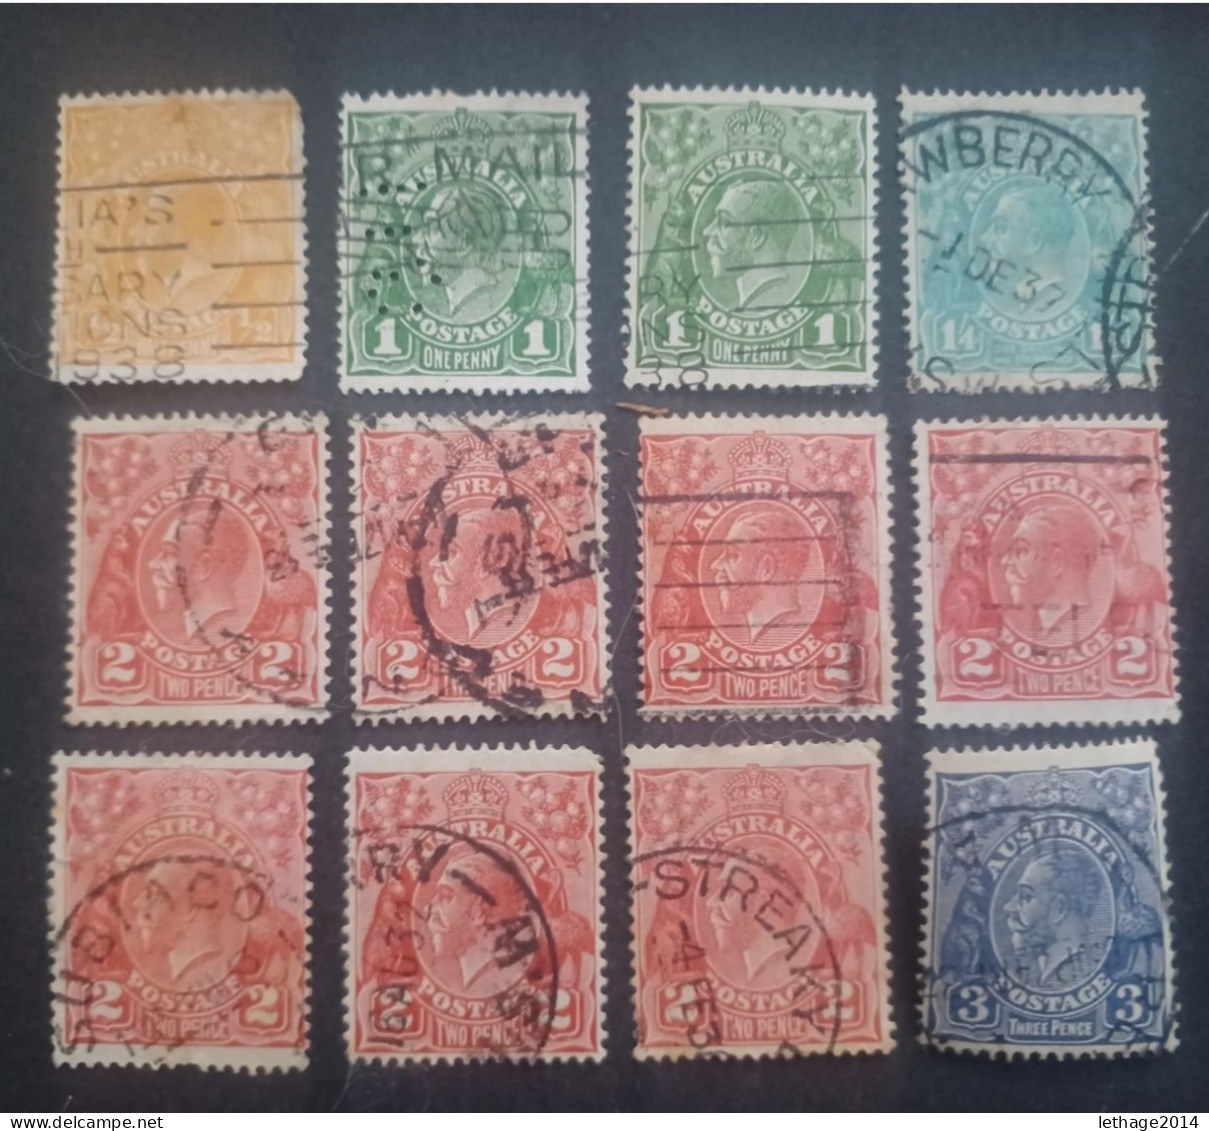 AUSTRALIA 1913 KANGOROO + KING GEORGE V + STOCK LOT MIX 33 SCANNERS MANY STAMPS FRAGMANT PERFIN - Collezioni